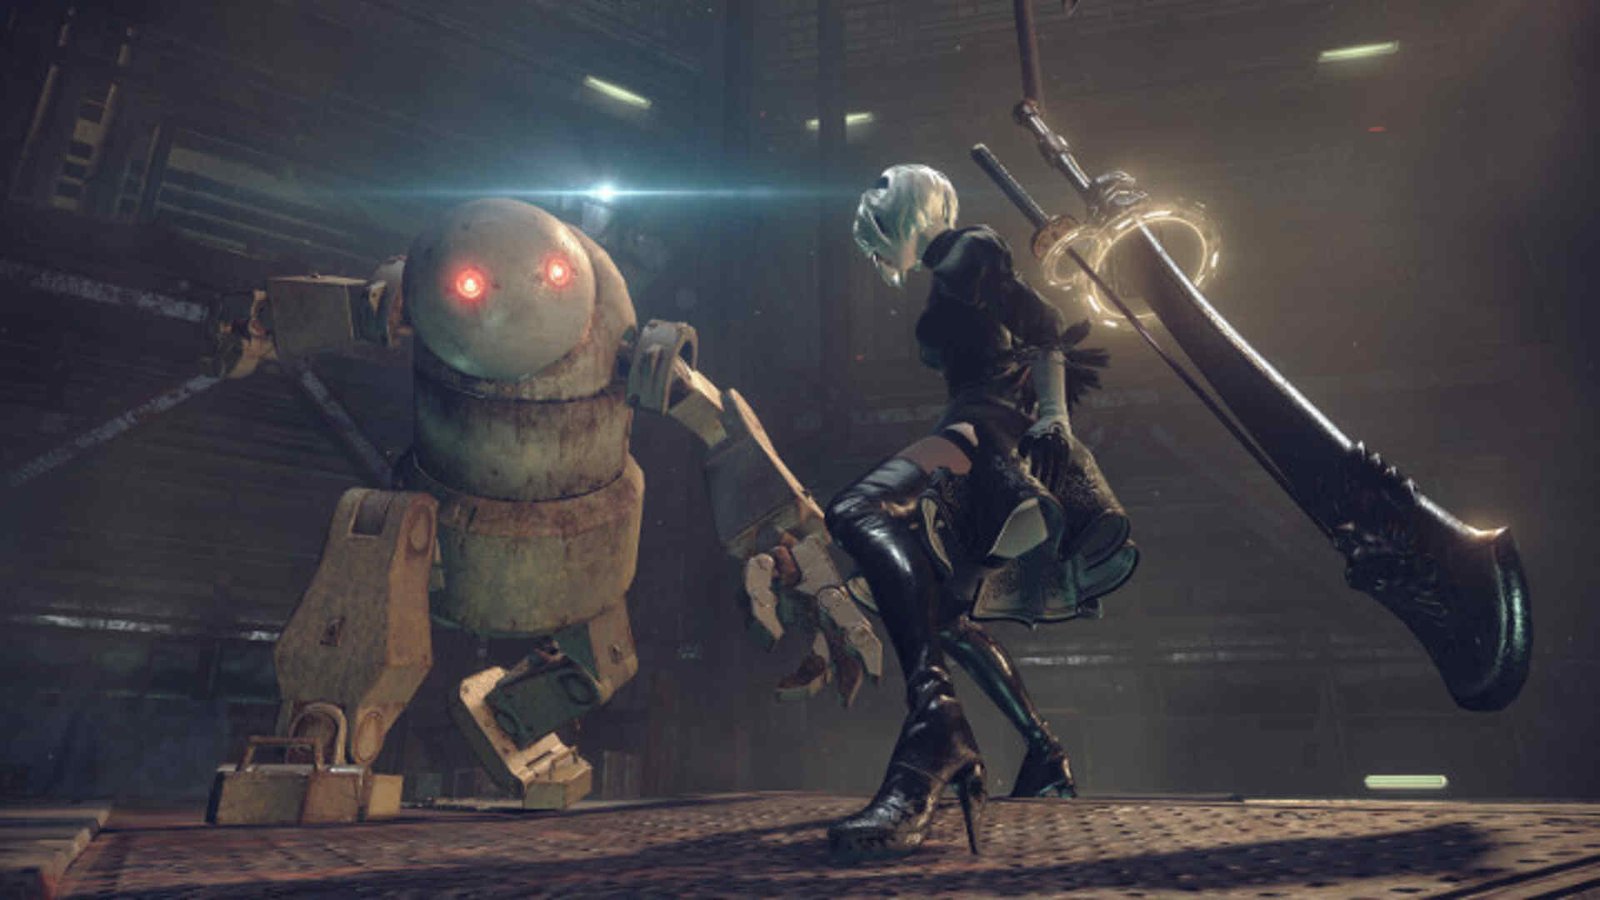 How to install mods for Nier Automata Steam Deck version?